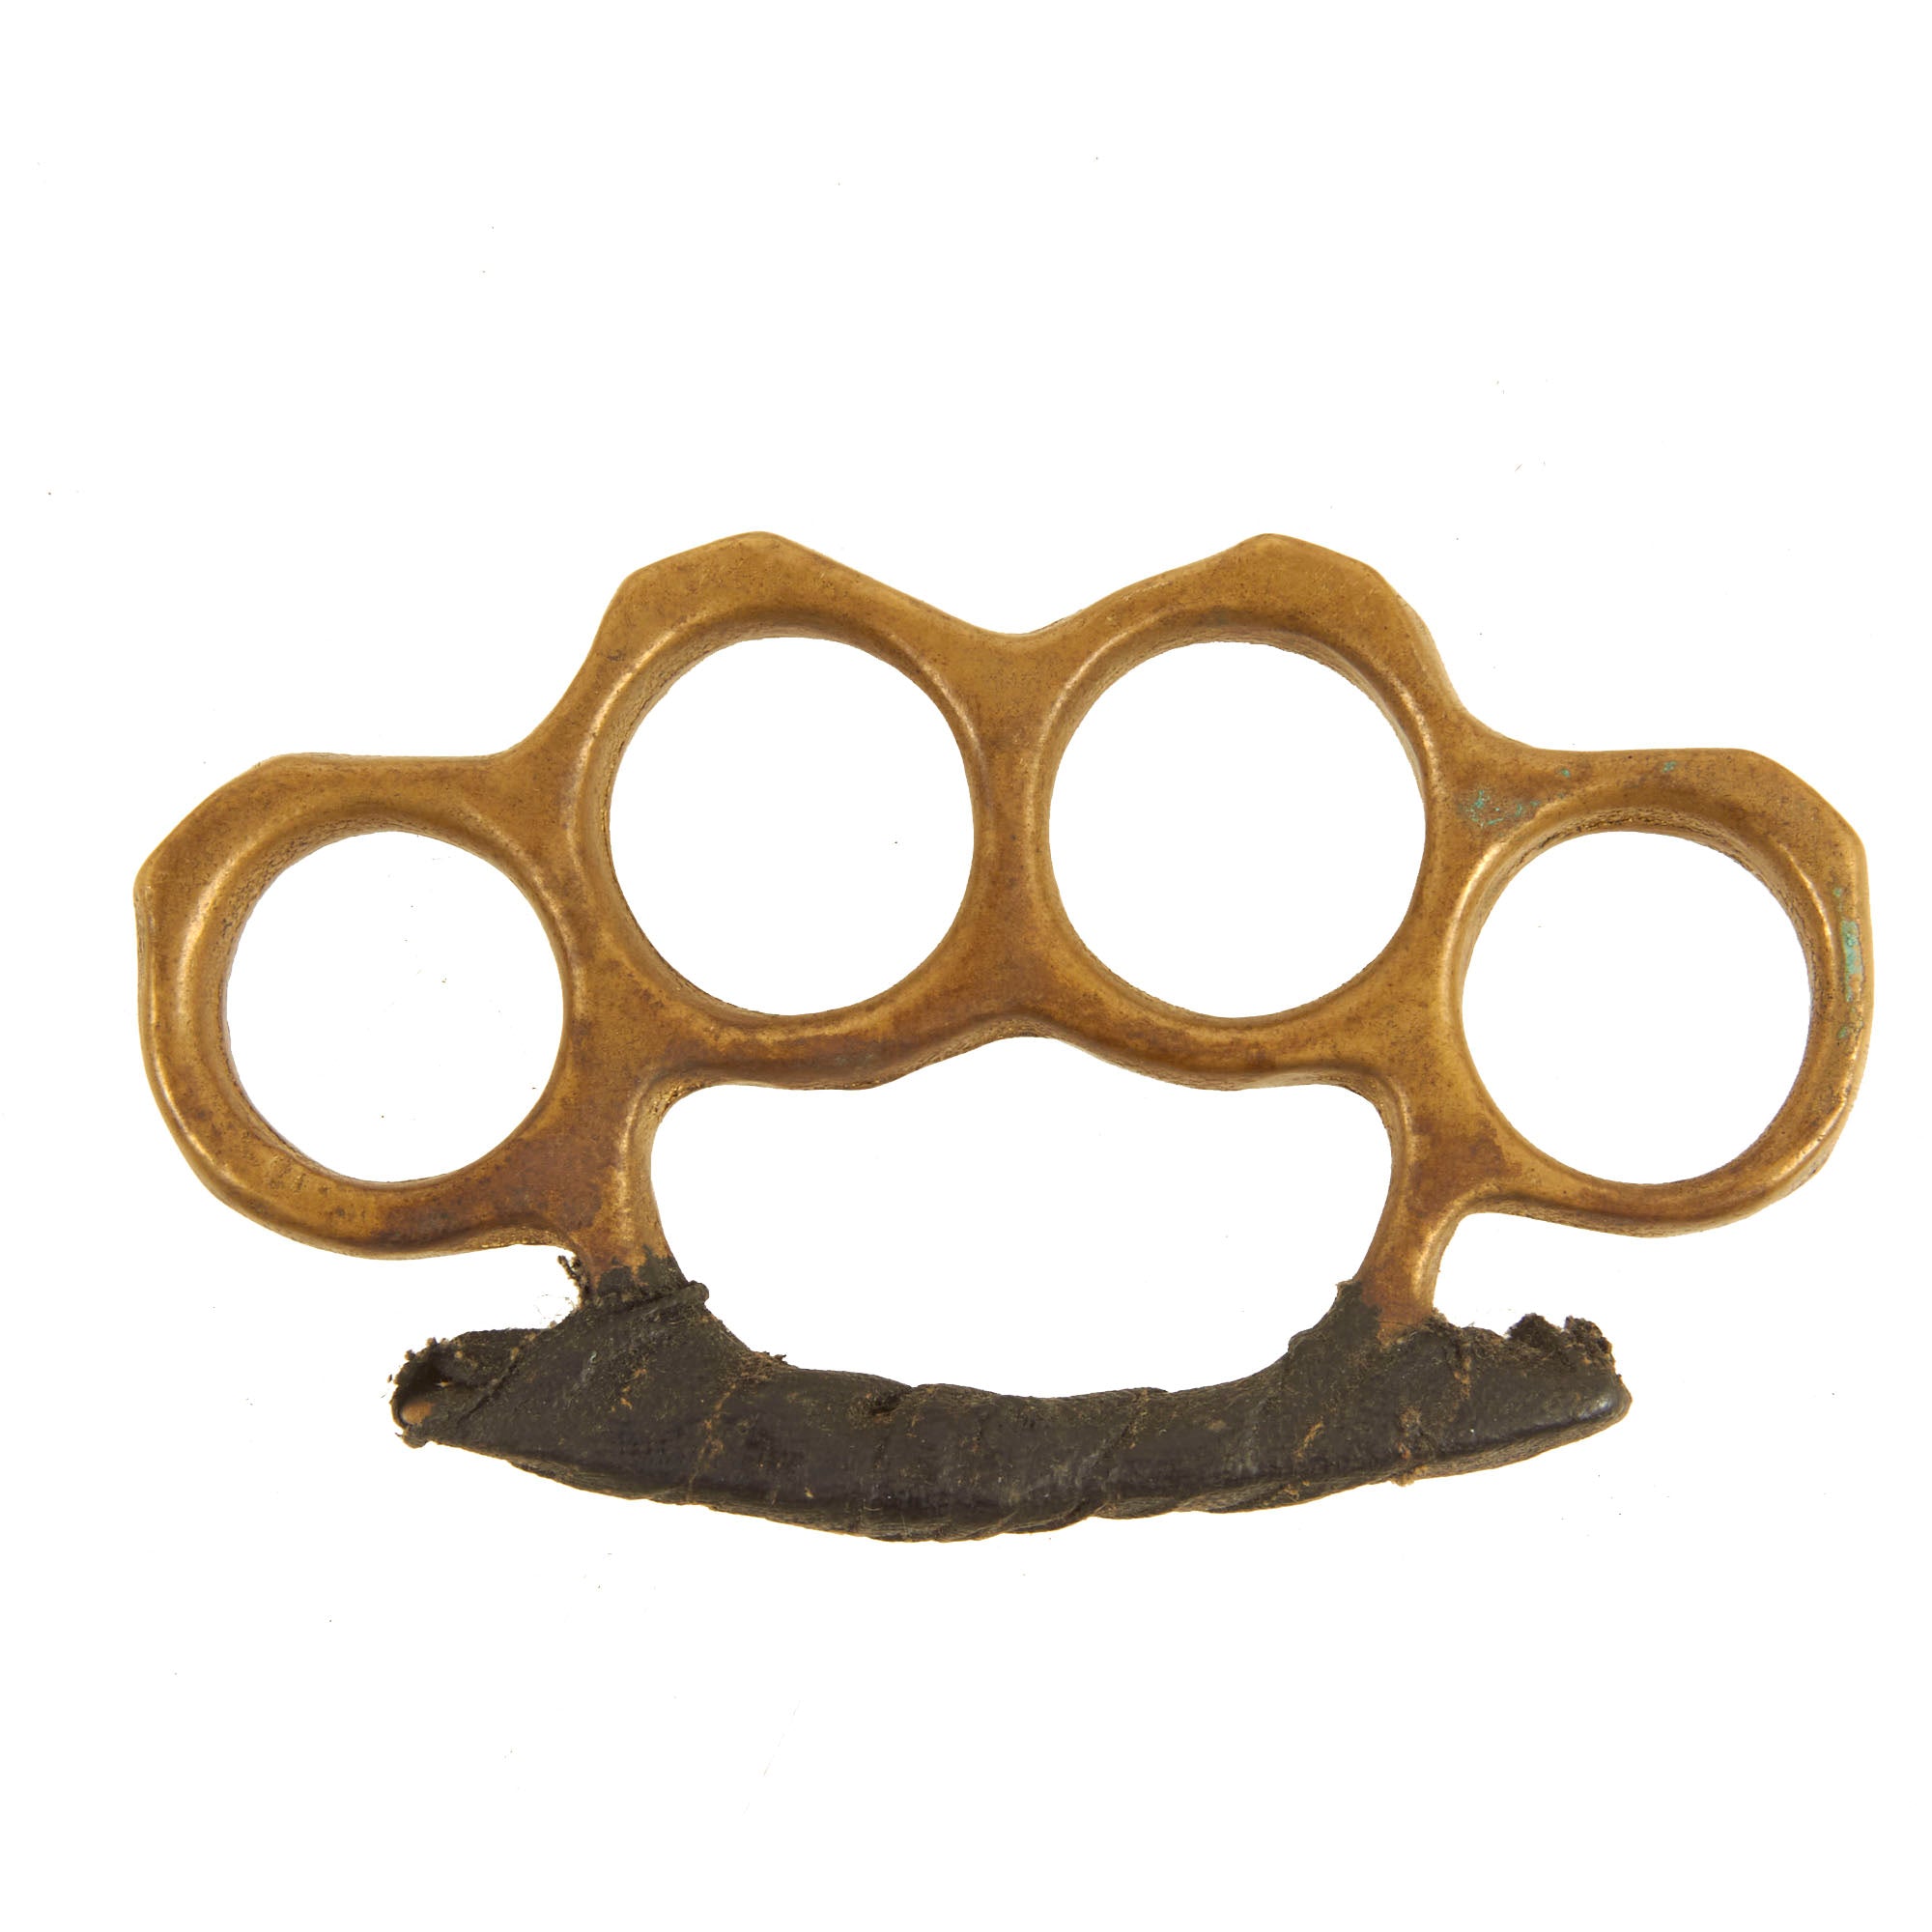 Original U.S. WWII Custom Made Cast Brass Knuckle Dusters with Grip Ta –  International Military Antiques